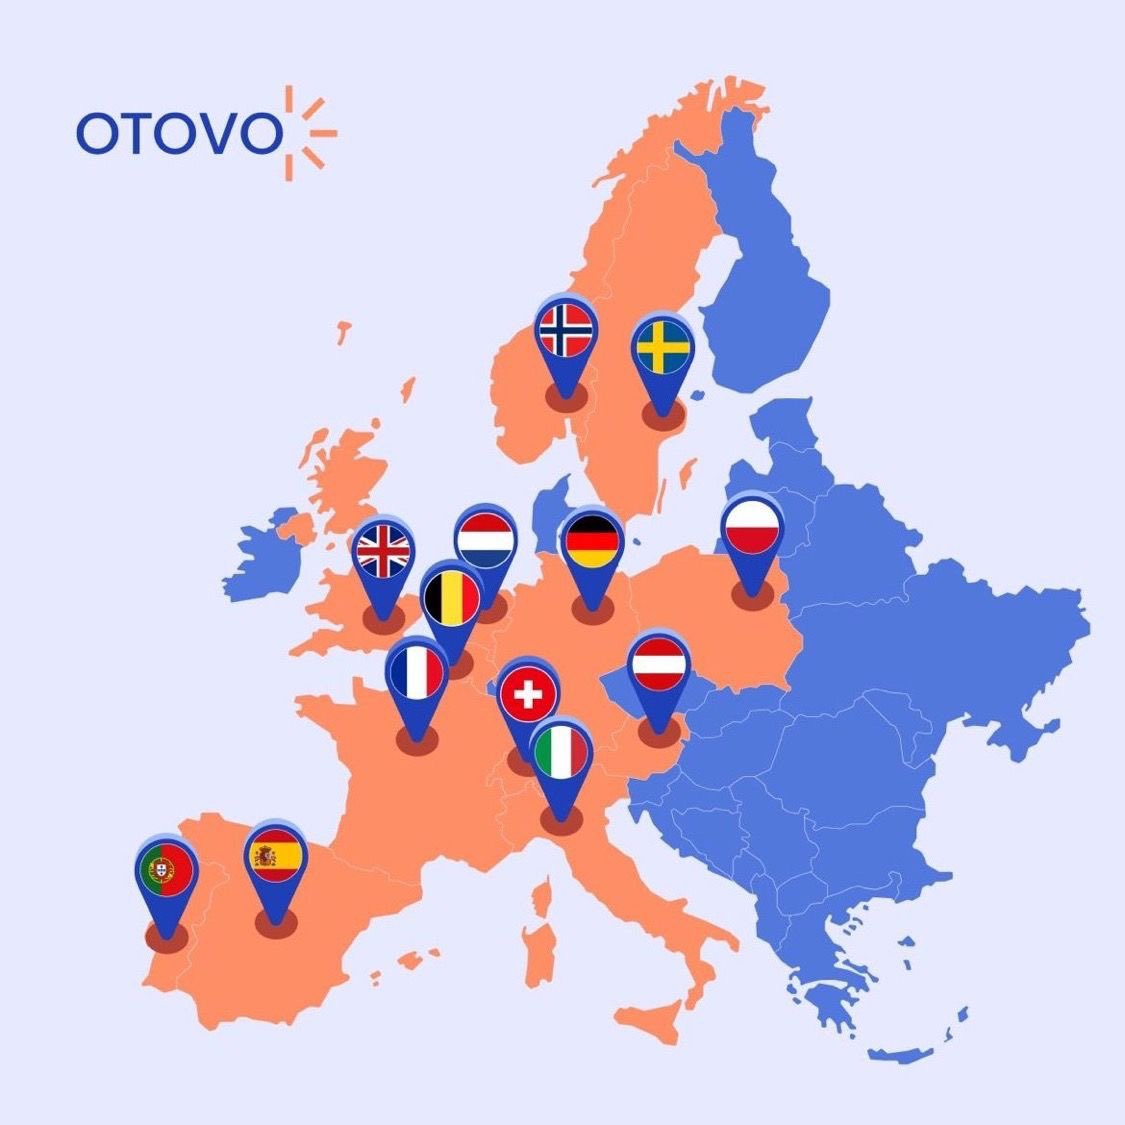 Proud to see @OtovoSolar cover more and more of Europe. We’re ready to put solar panels on every roof and batteries in every home.